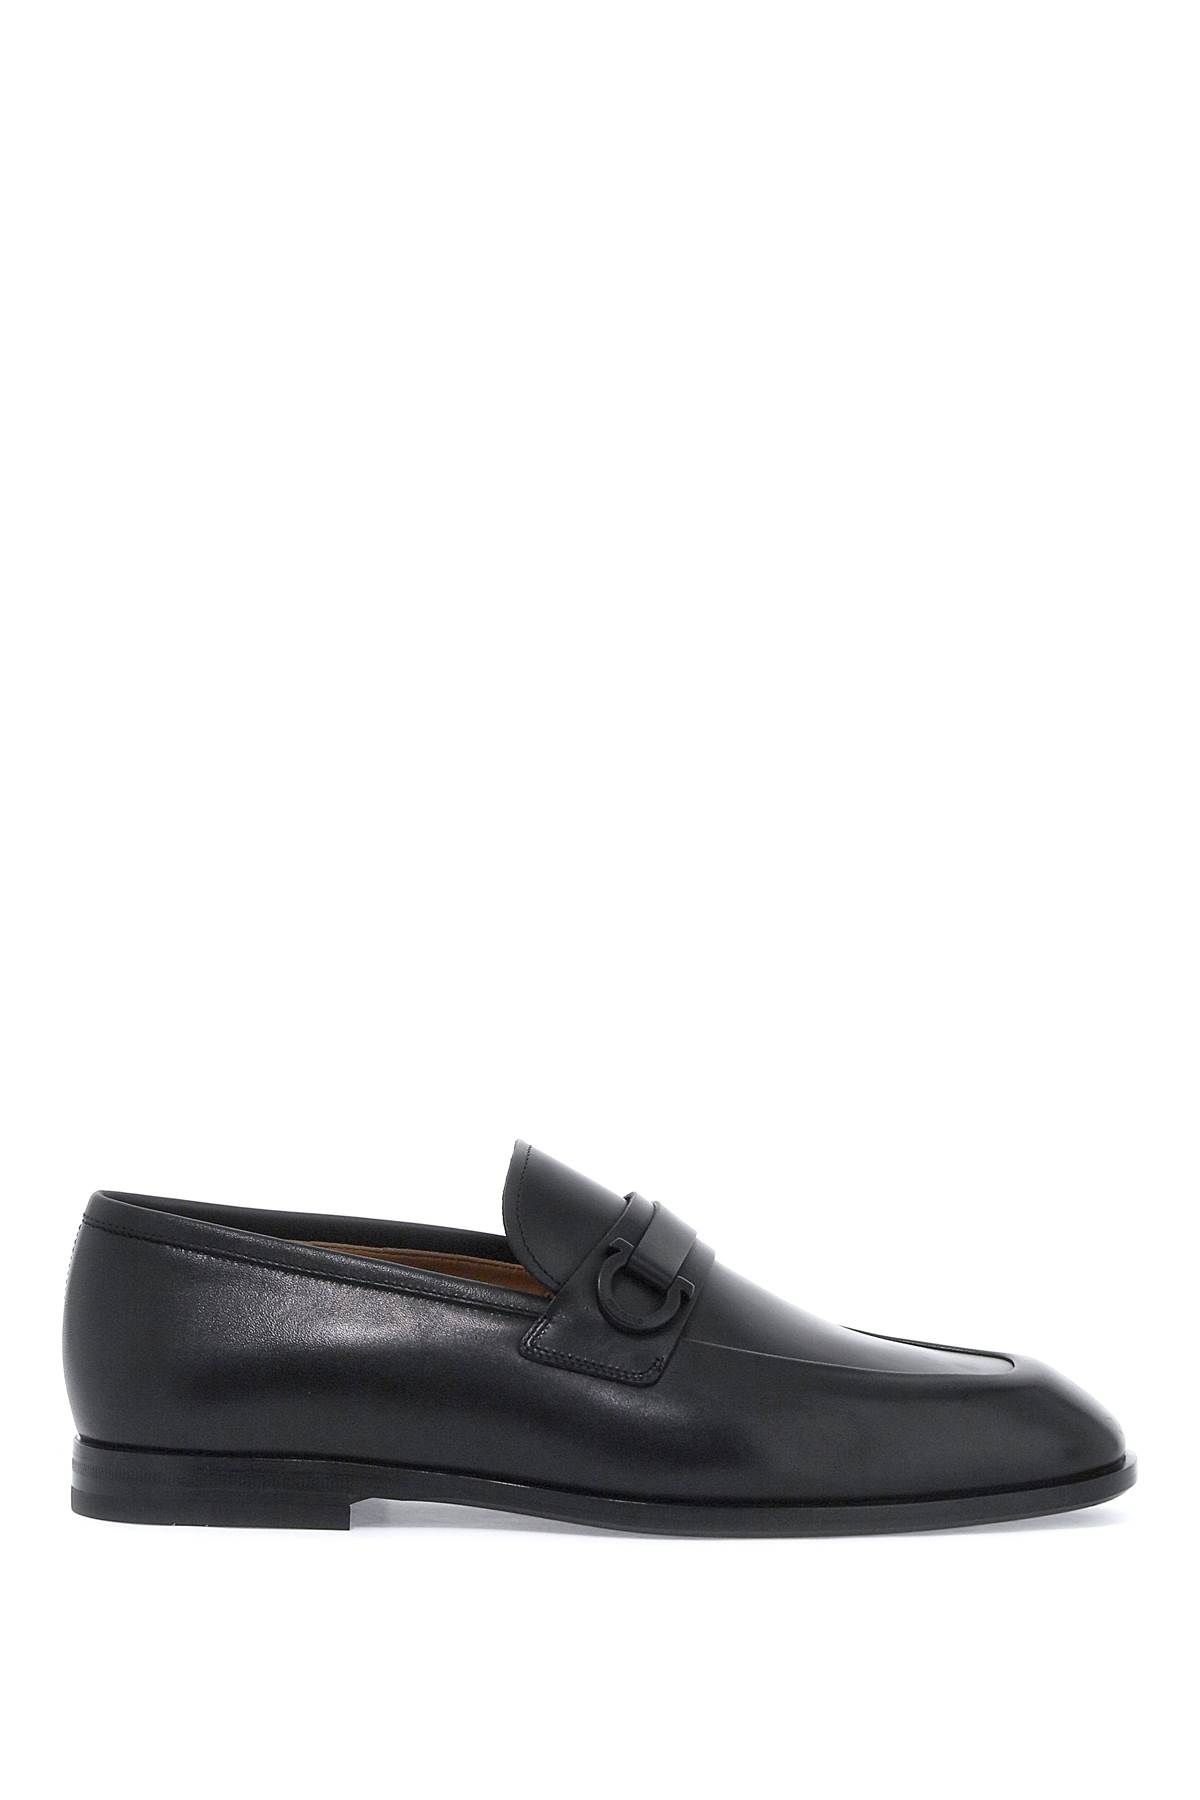 Ferragamo Smooth Leather Loafers With Gancini In Black